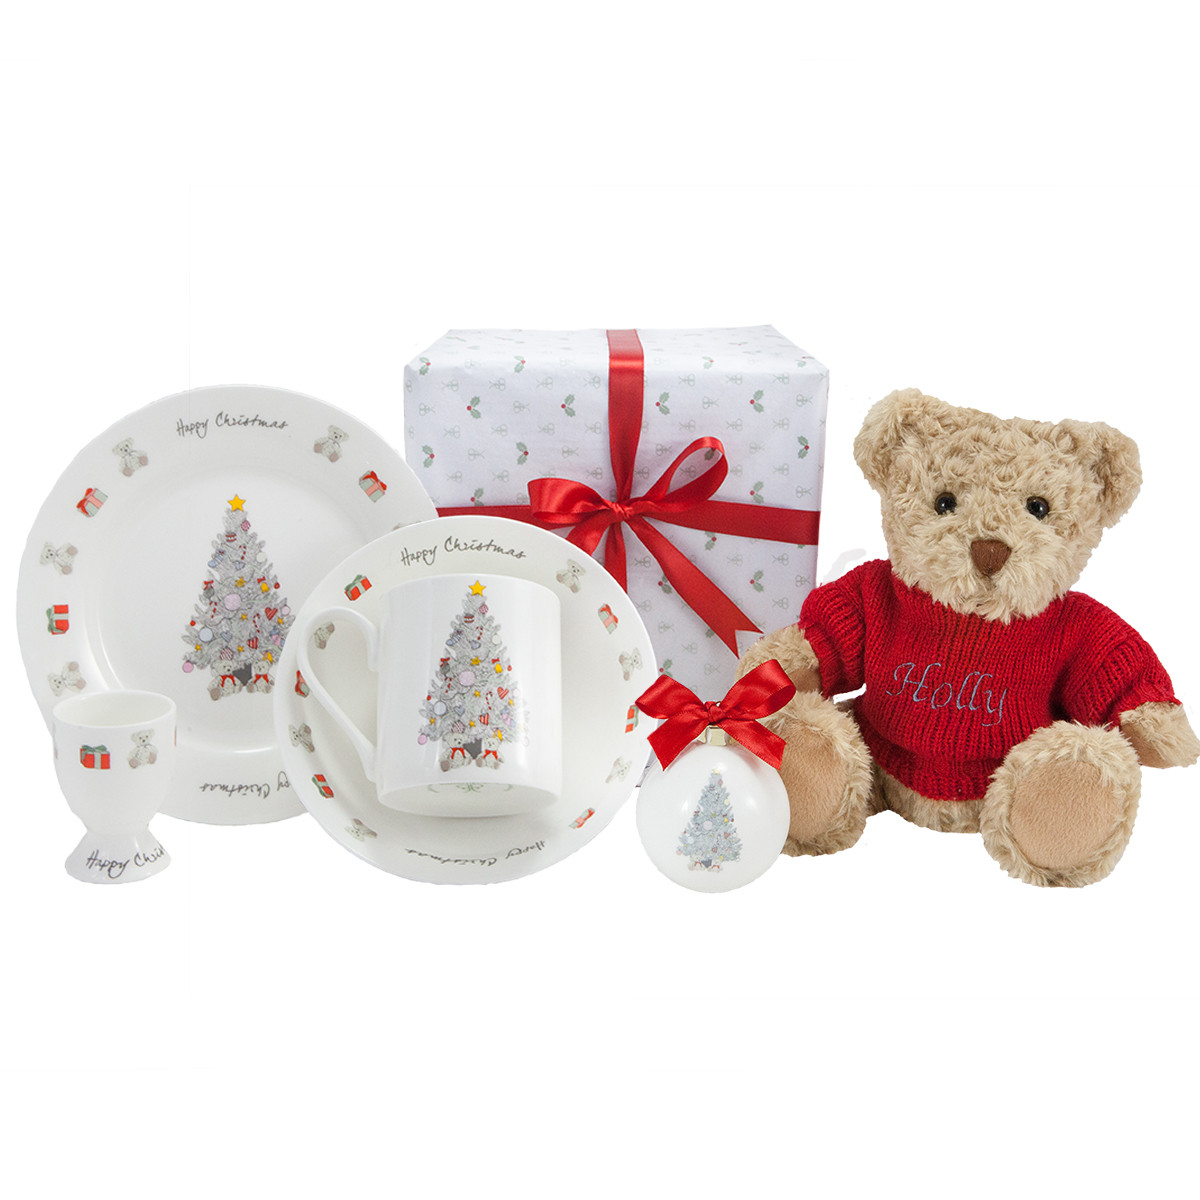 Babys First Christmas Gift Ideas
 Baby s First Christmas Gift Ideas The Syders